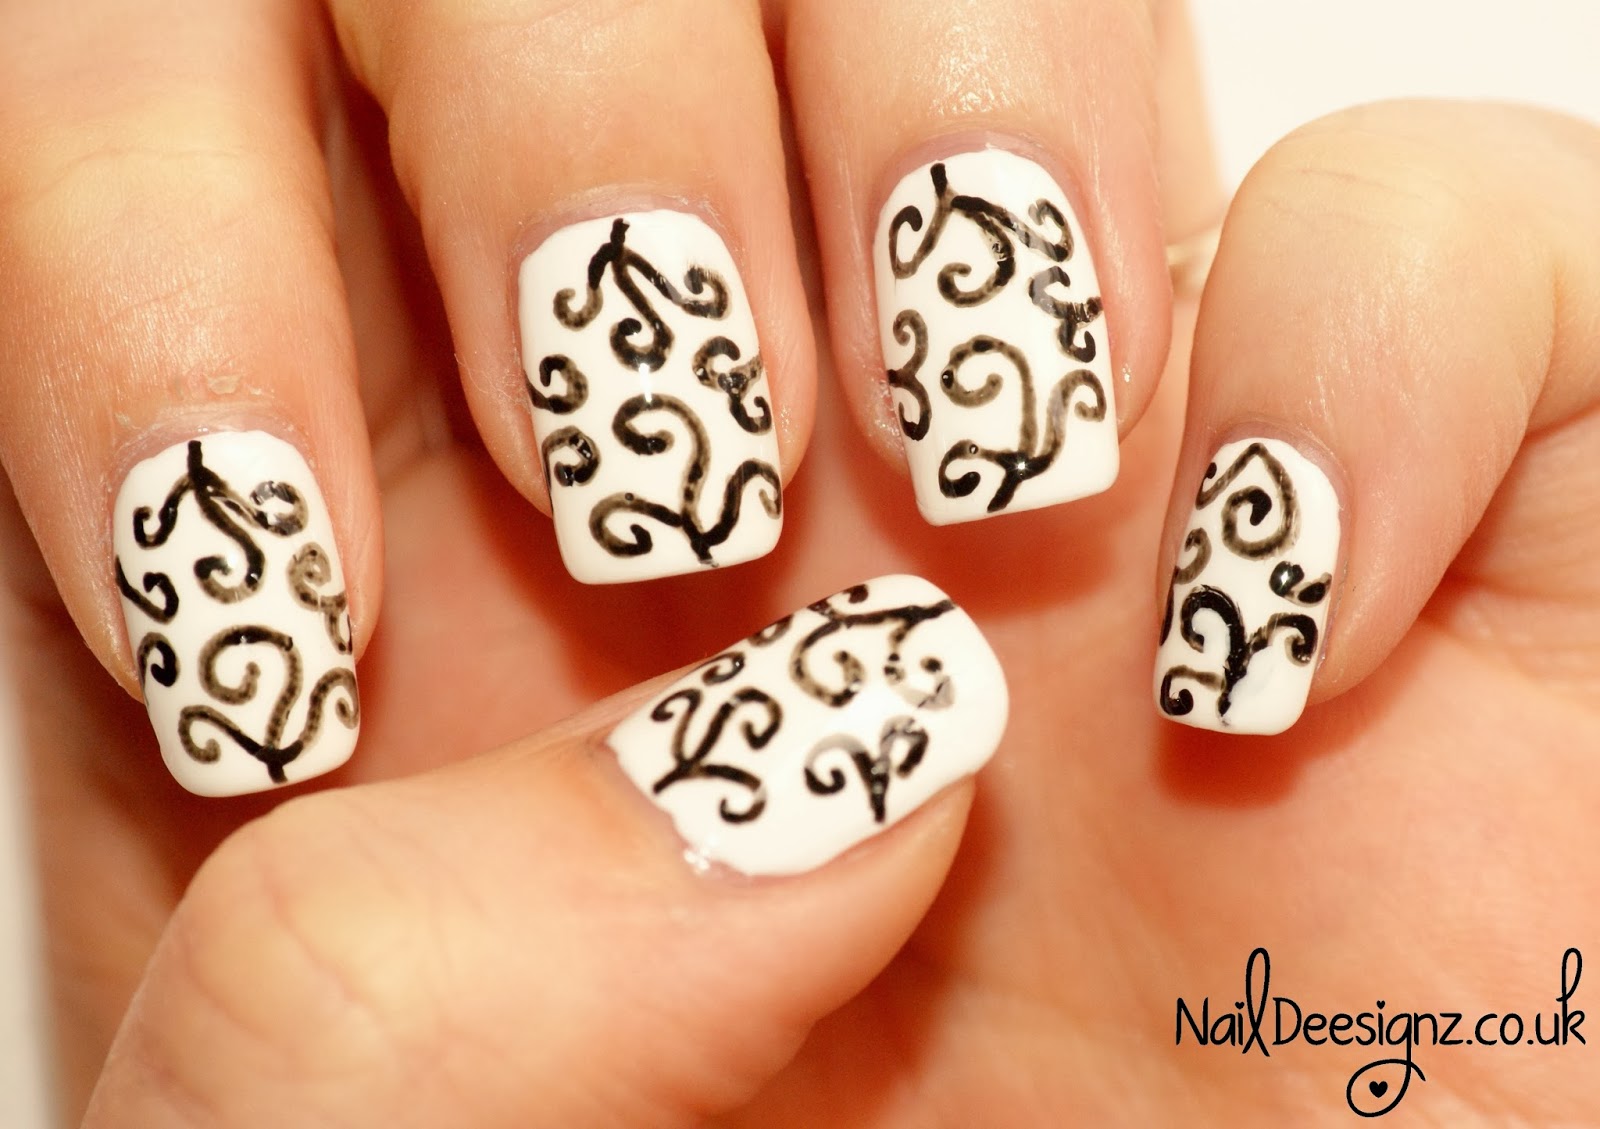 Black and White Nail Art Ideas on Tumblr - wide 9